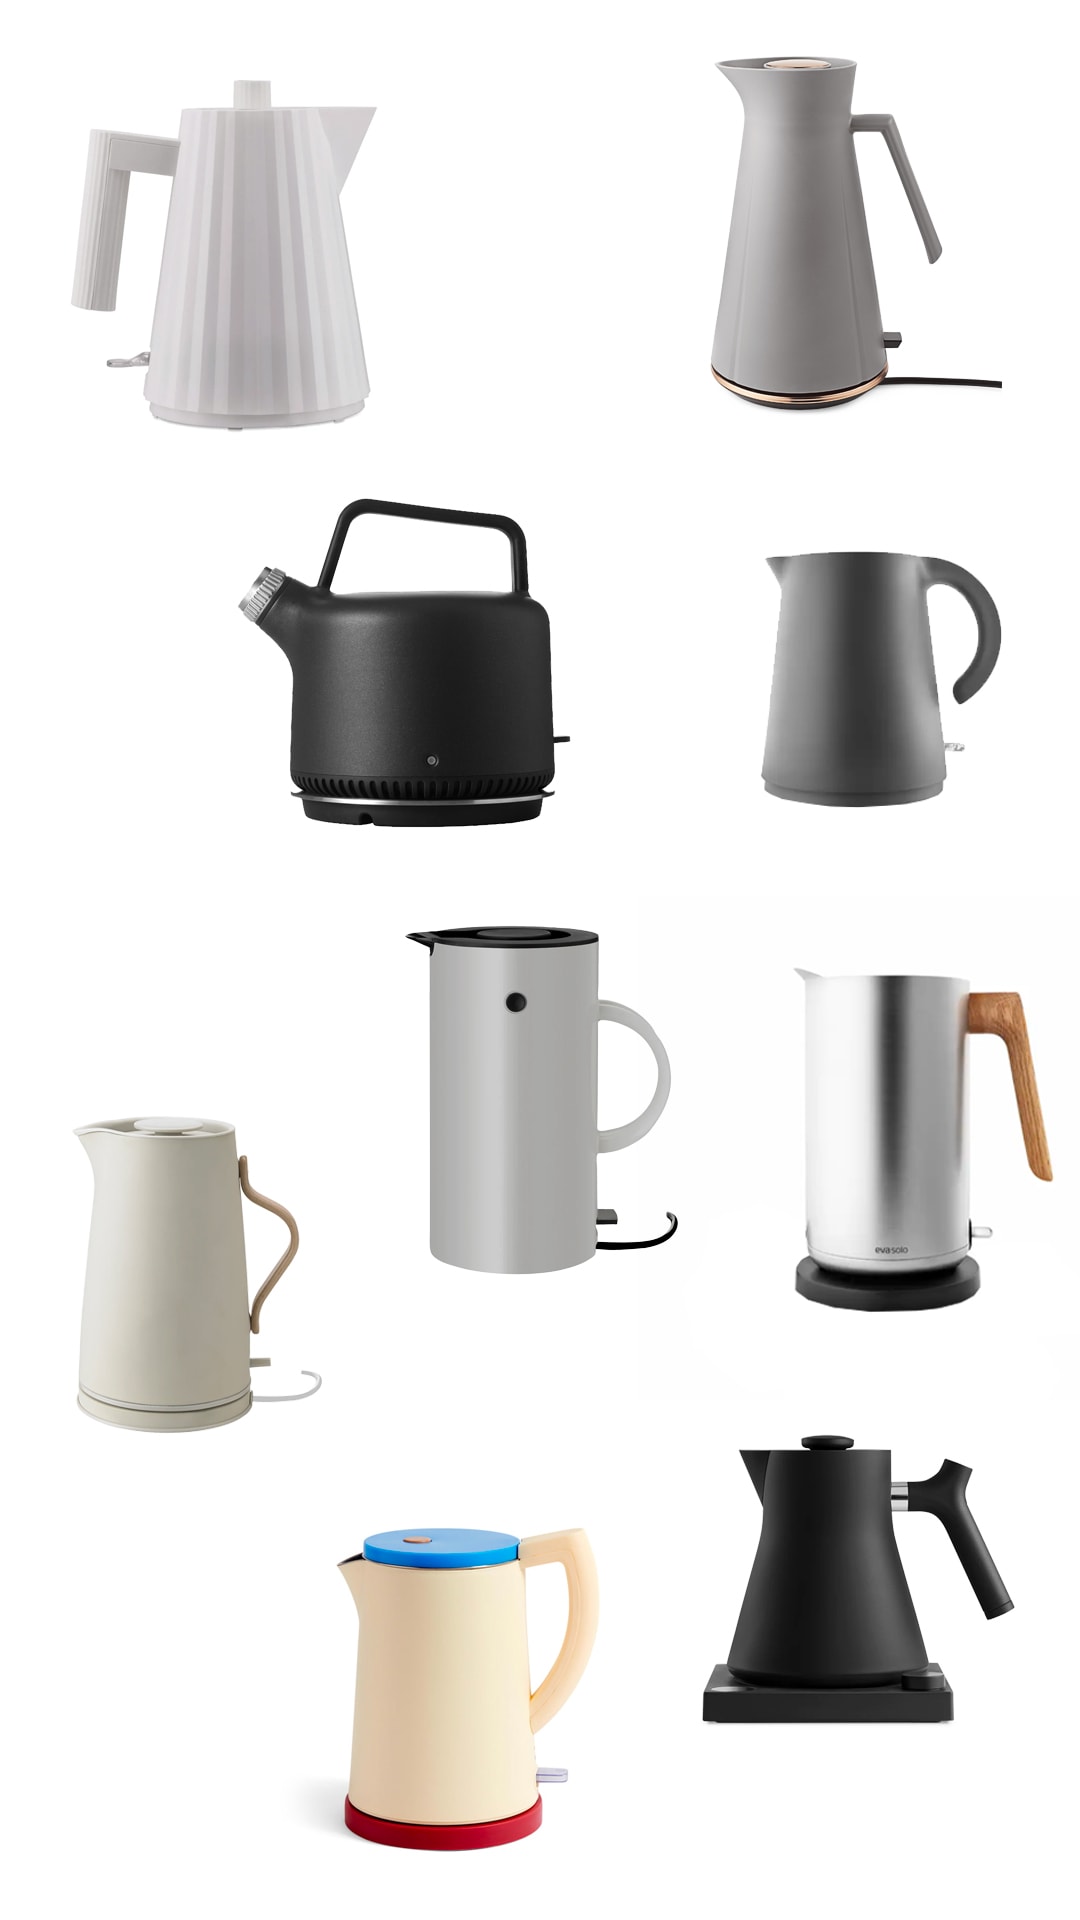 Electric design kettle by Eva Solo